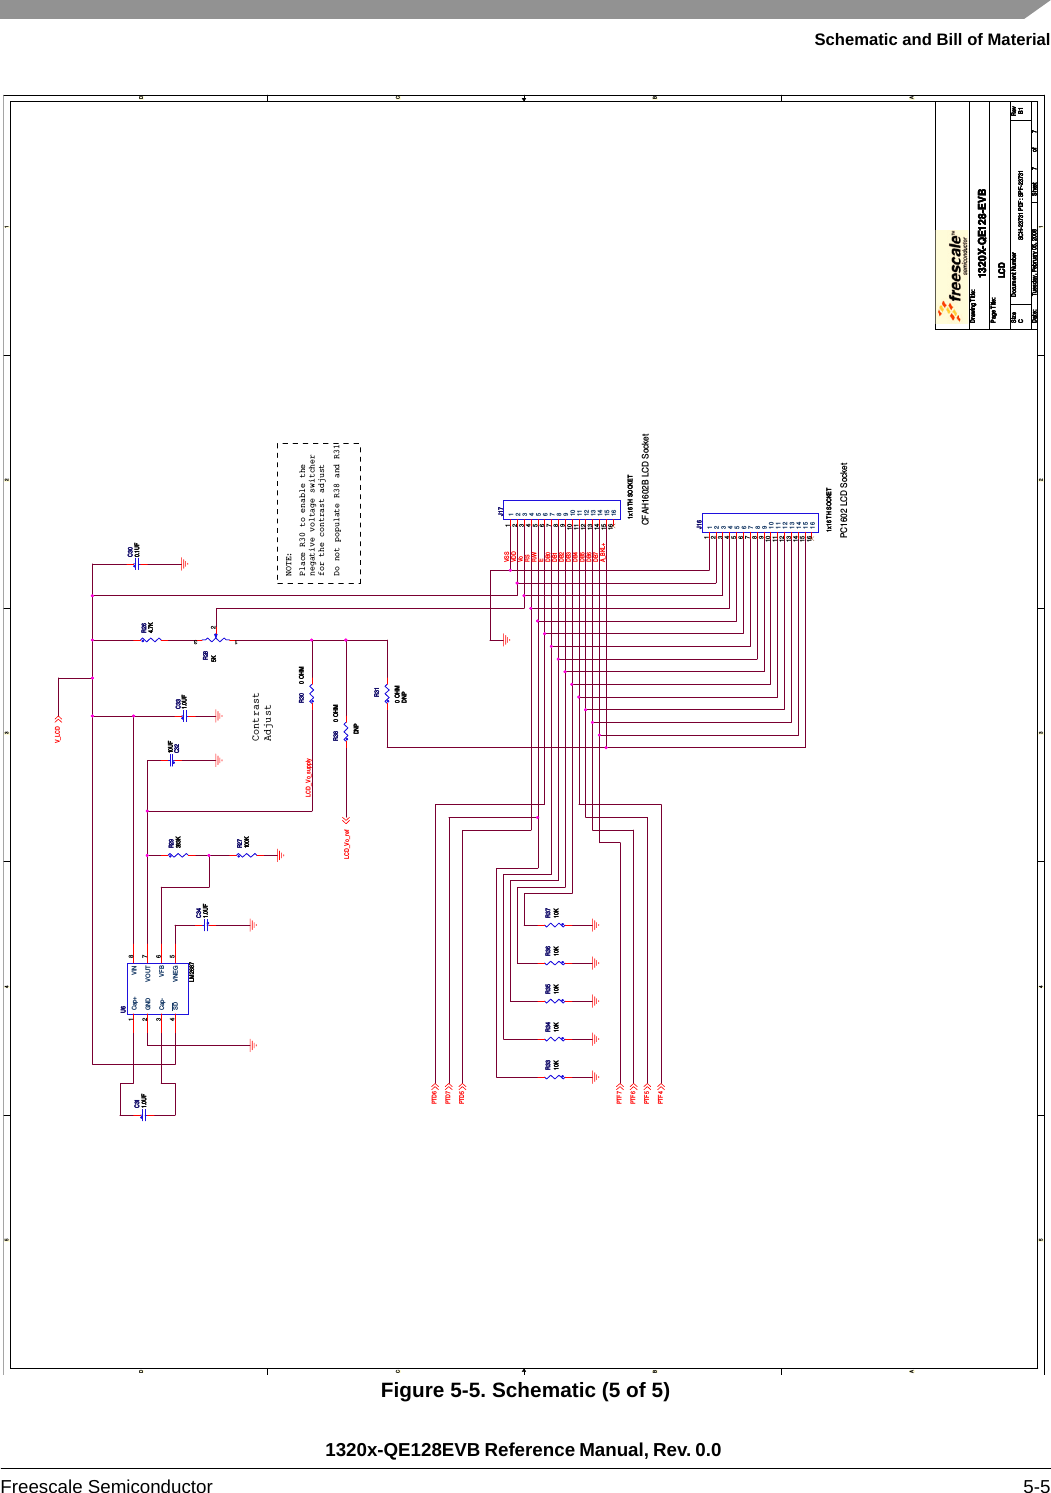 Schematic and Bill of Material1320x-QE128EVB Reference Manual, Rev. 0.0 Freescale Semiconductor 5-5Figure 5-5. Schematic (5 of 5)5544332211D DC CB BA ALCD_Vo_supplyDB4DB5DB6VSSVoVDDRSR/WEDB7DB0DB2DB3DB1A_BKL+V_LCDPTD5PTD7PTF4PTF5PTF6PTF7PTD6LCD_Vo_refDrawing Title:Size Document Number RevDate: Sheet ofPage Title:SCH-23731 PDF: SPF-23731 B11320X-QE128-EVBCTuesday, February 05, 2008LCD77Drawing Title:Size Document Number RevDate: Sheet ofPage Title:SCH-23731 PDF: SPF-23731 B11320X-QE128-EVBCTuesday, February 05, 2008LCD77Drawing Title:Size Document Number RevDate: Sheet ofPage Title:SCH-23731 PDF: SPF-23731 B11320X-QE128-EVBCTuesday, February 05, 2008LCD77ContrastAdjustCFAH1602B LCD SocketPlace R30 to enable thenegative voltage switcherfor the contrast adjustDo not populate R38 and R31NOTE:PC1602 LCD SocketR3610KR3610KR27100KR27100KR3410KR3410KR30 0 OHMR30 0 OHMR285KR285K1 32R3310KR3310KC300.1UFC300.1UFR3710KR3710KR3510KR3510KR29383KR29383KR264.7KR264.7KC331.0UFC331.0UFC341.0UFC341.0UFC3210UFC3210UFC311.0UFC311.0UFR310 OHMDNPR310 OHMDNPJ161x16 TH SOCKETJ161x16 TH SOCKET1122334455667788991010111112121313141415151616U6LM2687U6LM2687Cap+1GND2Cap-3SD4VNEG 5VFB 6VOUT 7VIN 8J171x16 TH SOCKETJ171x16 TH SOCKET1122334455667788991010111112121313141415151616R38 0 OHMDNPR38 0 OHMDNP